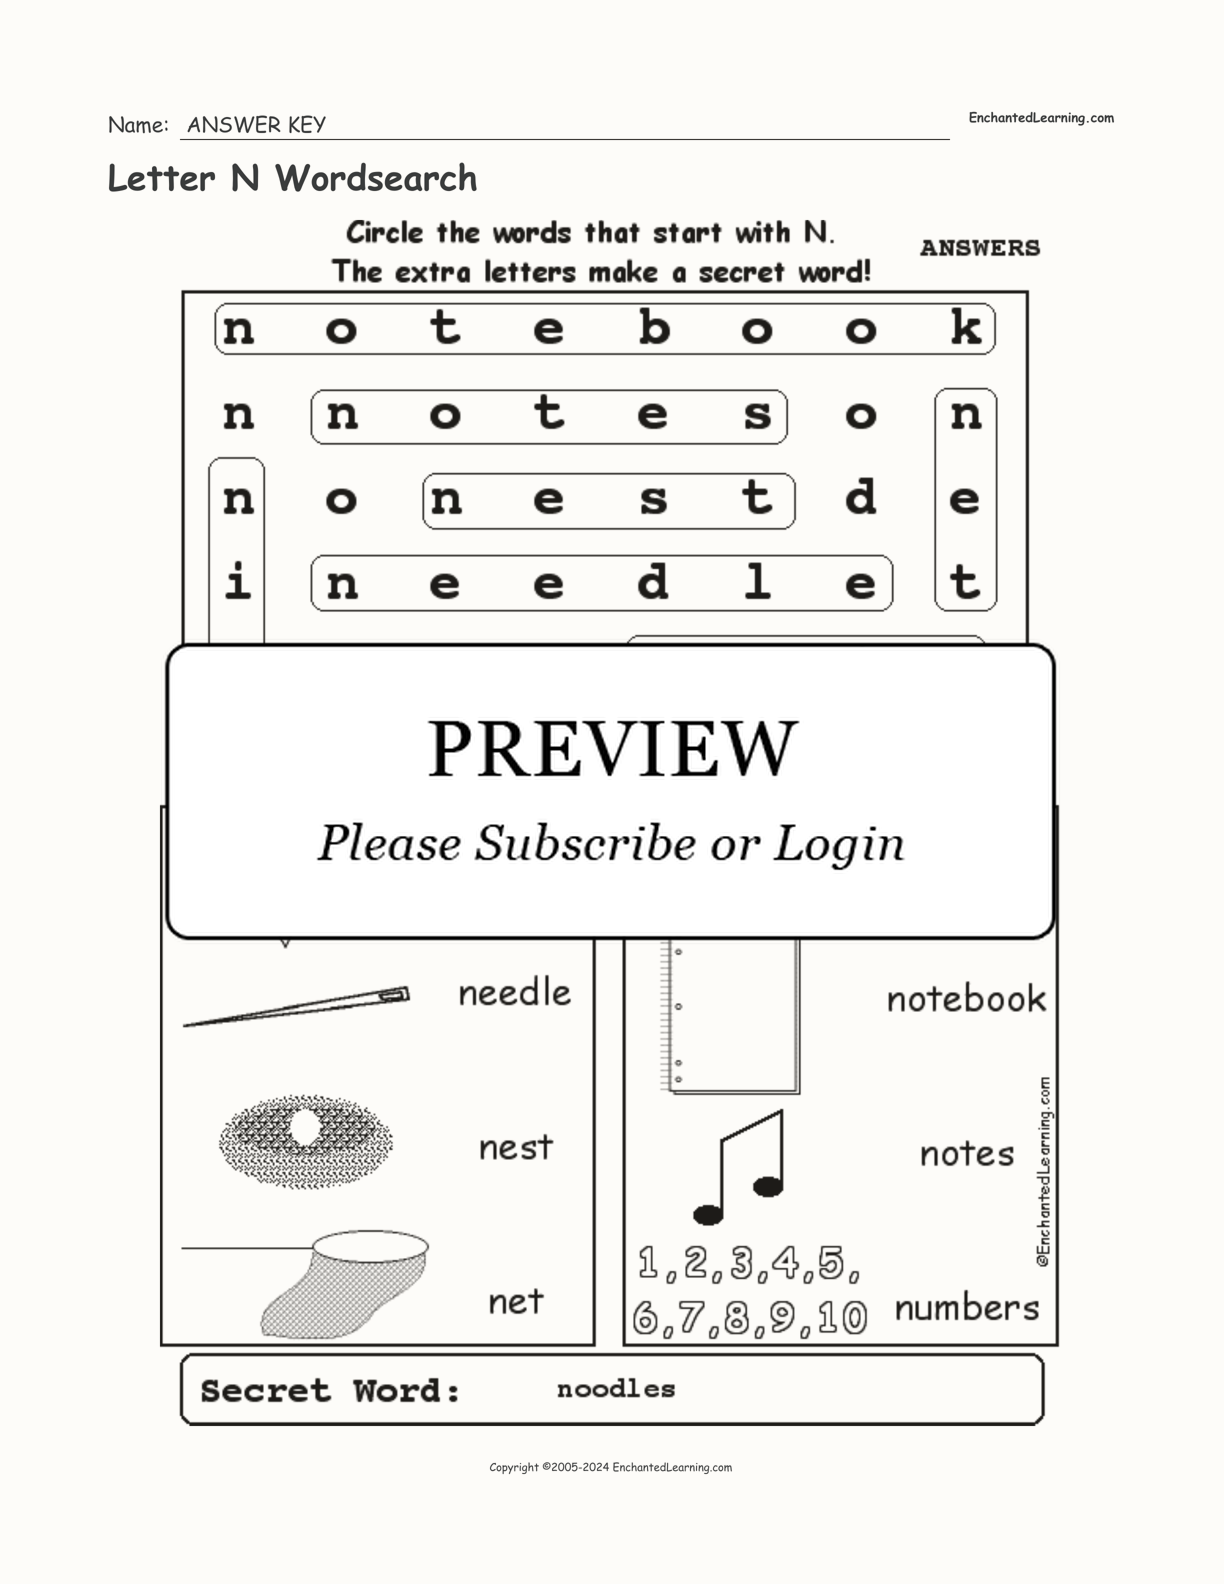 Letter N Wordsearch interactive worksheet page 2